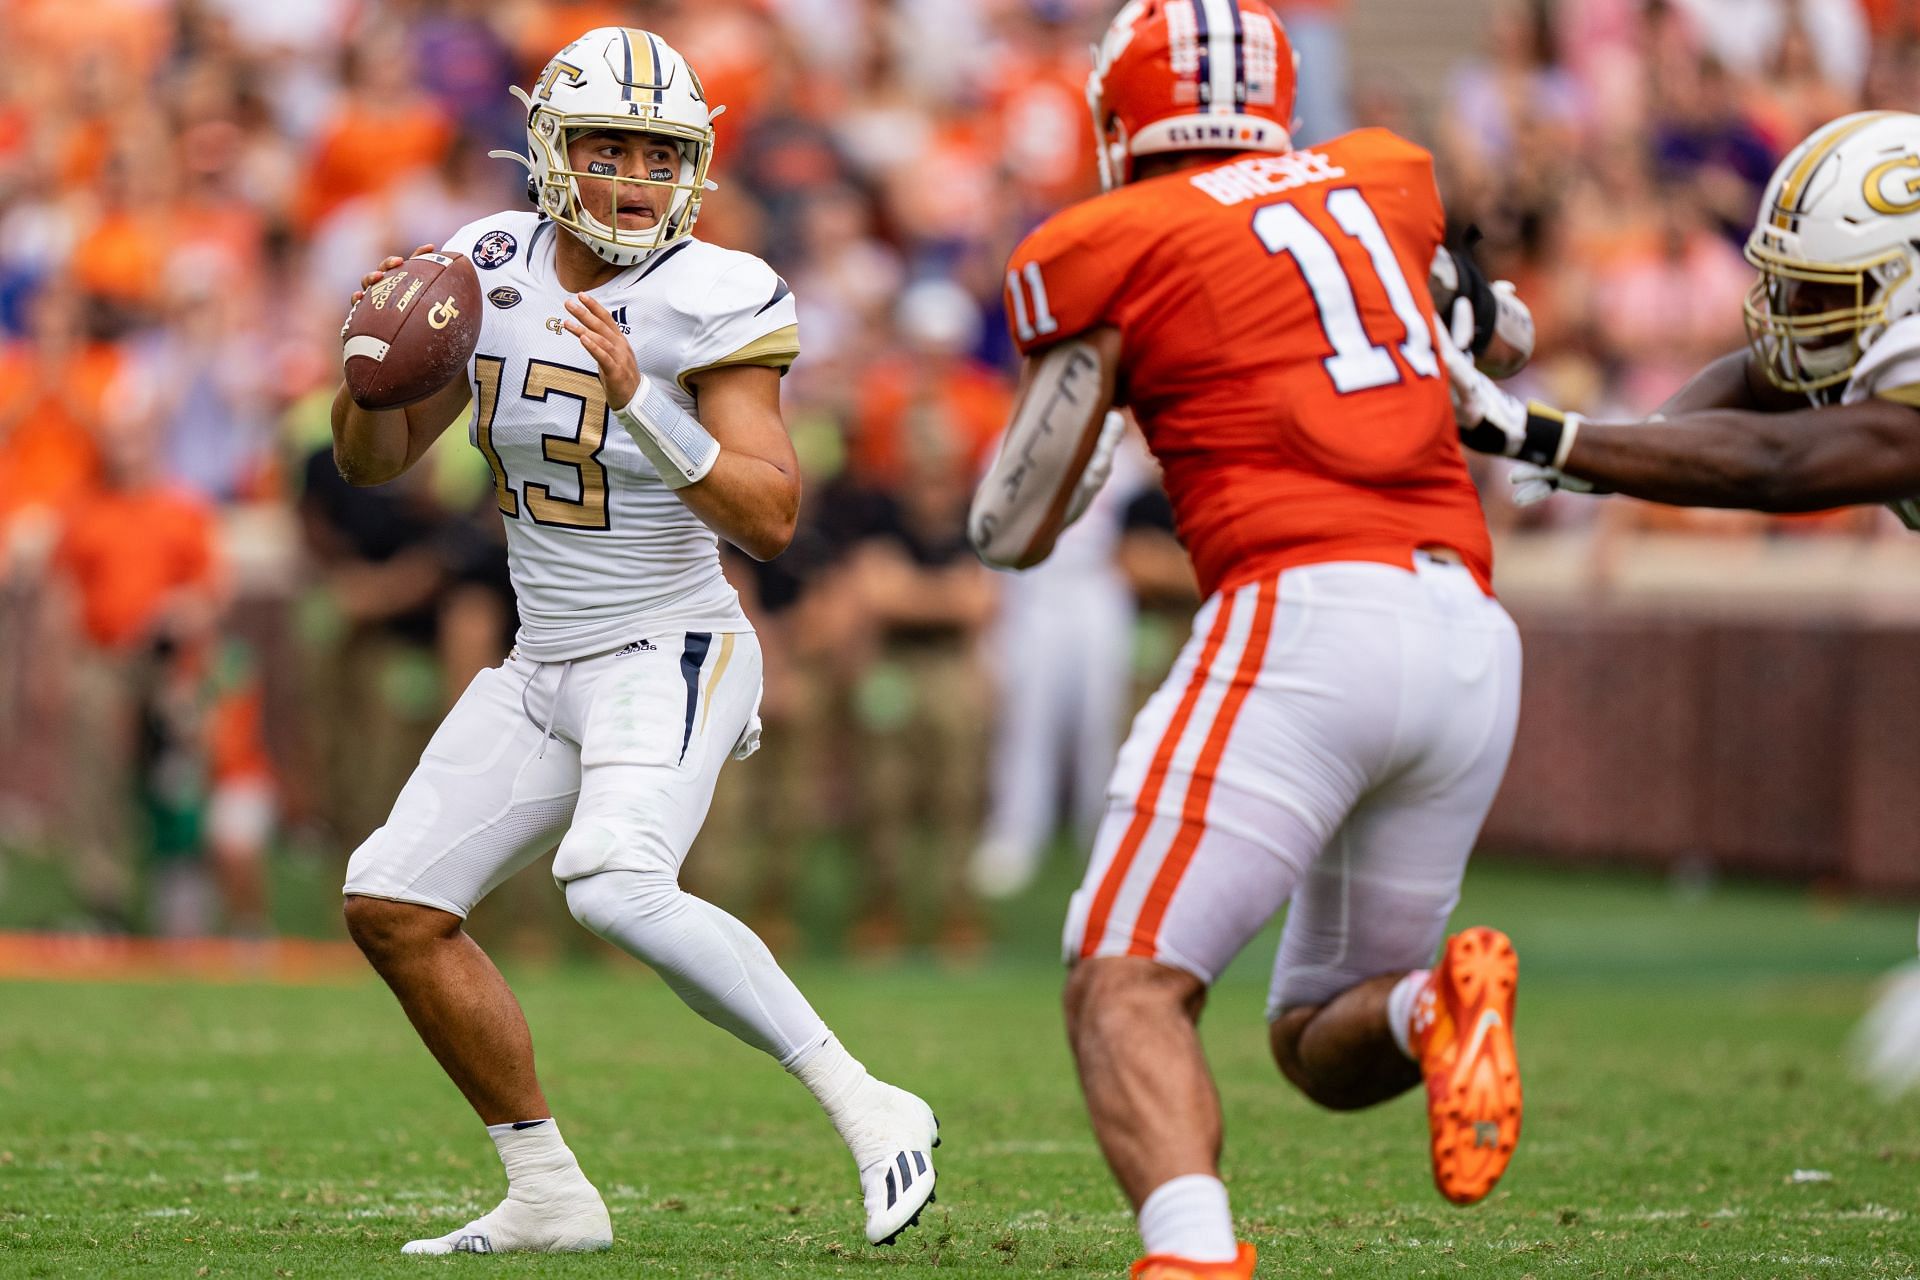 Quarterback Jordan Yates #13 of the Georgia Tech Yellow Jackets is pressured by defensive lineman Bryan Bresee #11 of the Clemson Tigers